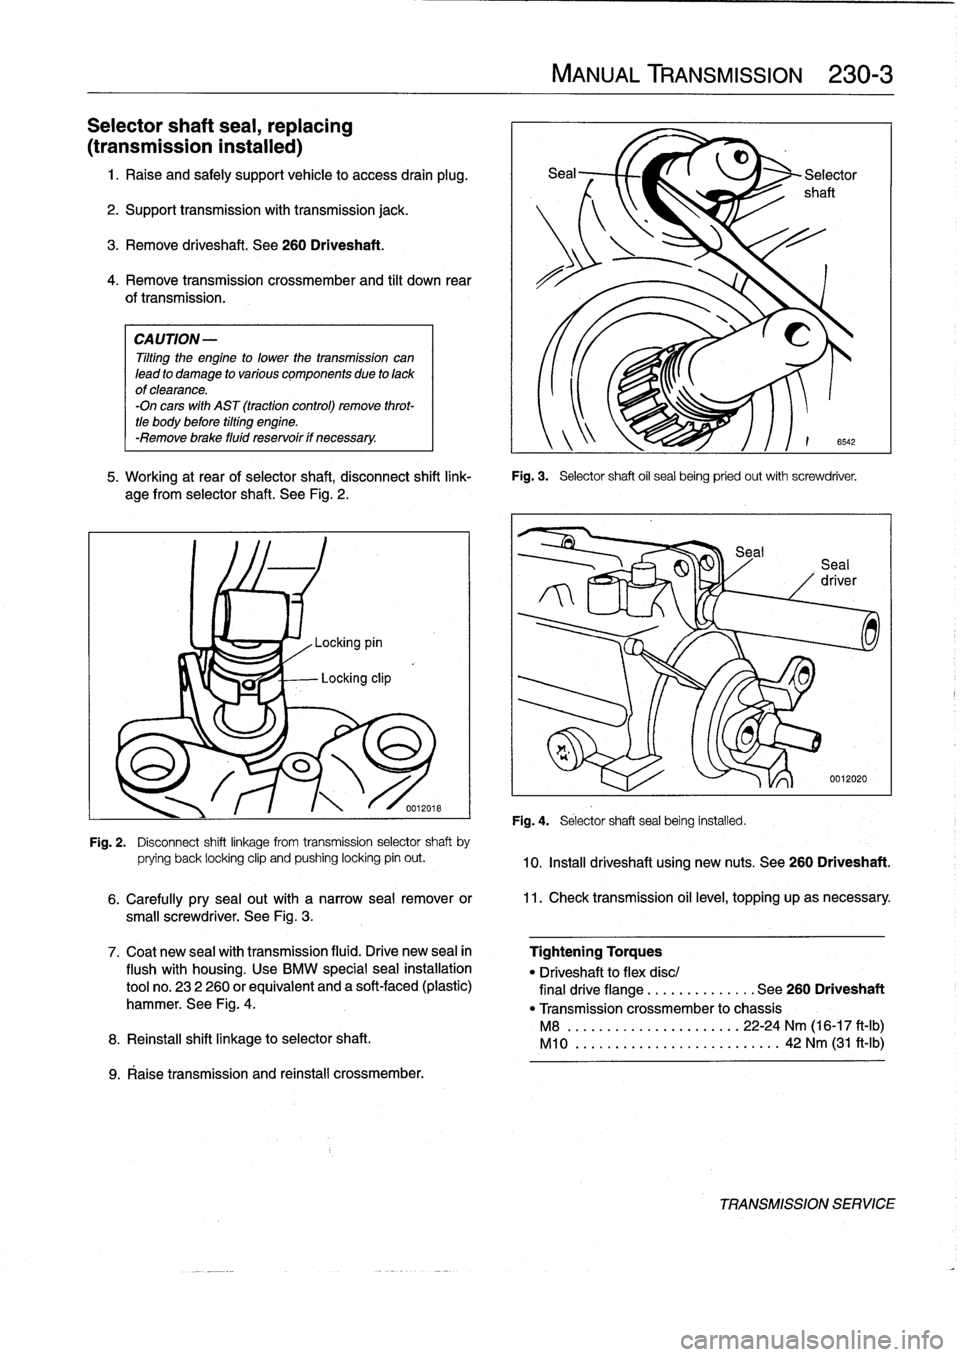 BMW 318i 1997 E36 User Guide 
Selector
shaft
seal,
replacing

(transmission
instalied)

1
.
Raise
and
safely
support
vehicle
to
access
drain
plug
.

2
.
Support
transmission
with
transmission
jack
.

3
.
Remove
driveshaft
.
See
2